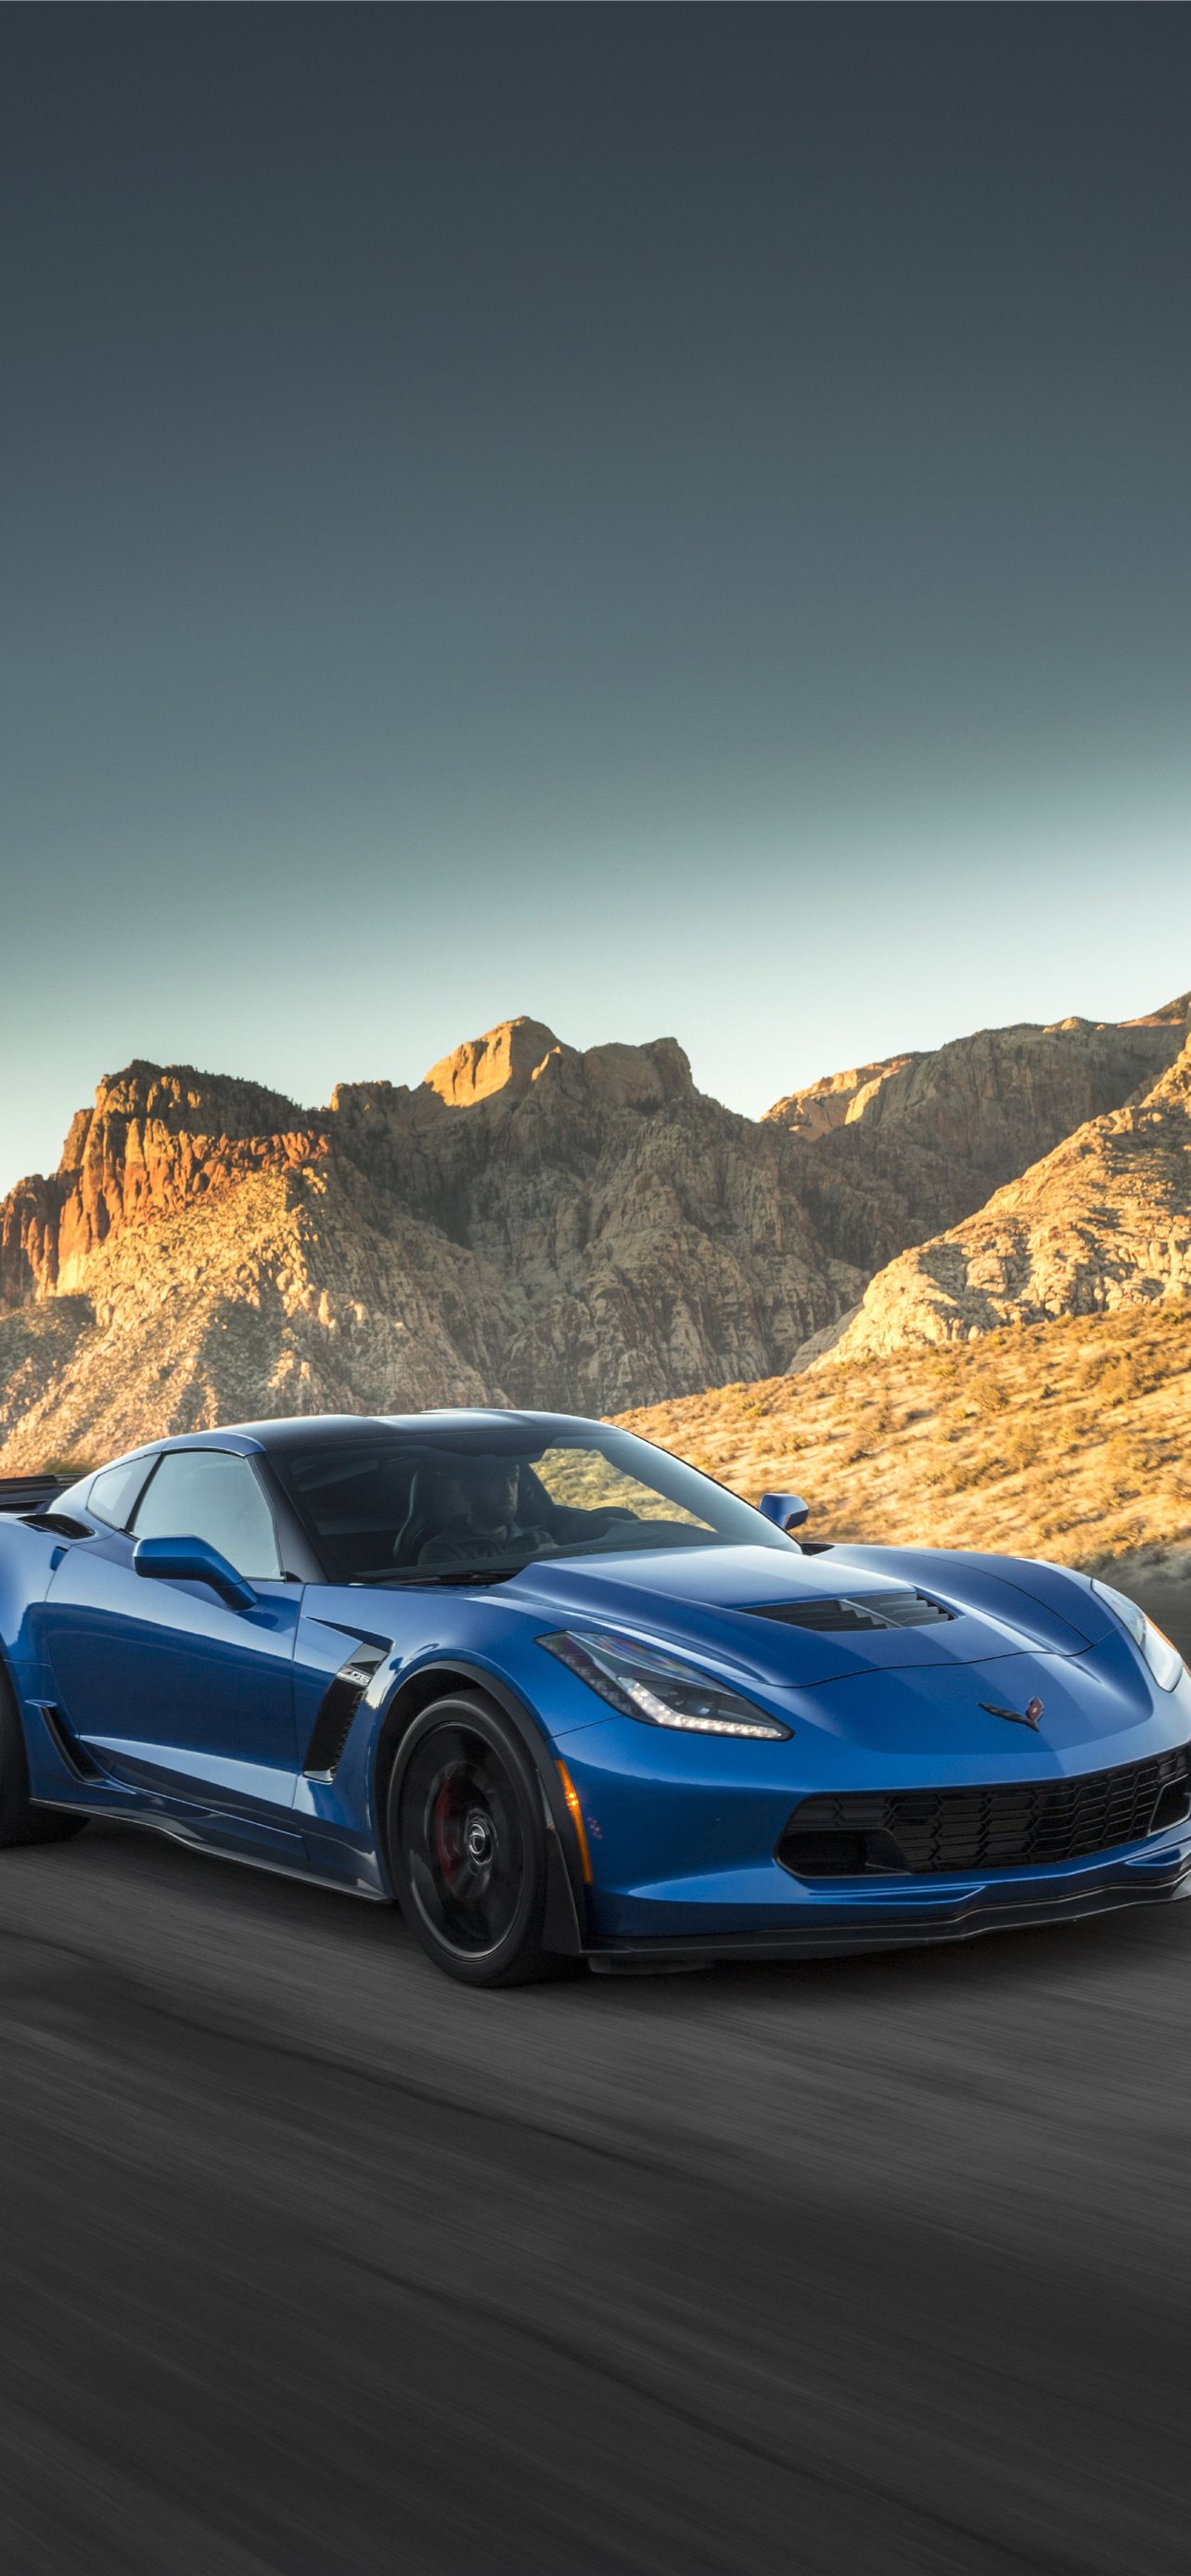 Download Corvette wallpapers for mobile phone free Corvette HD pictures